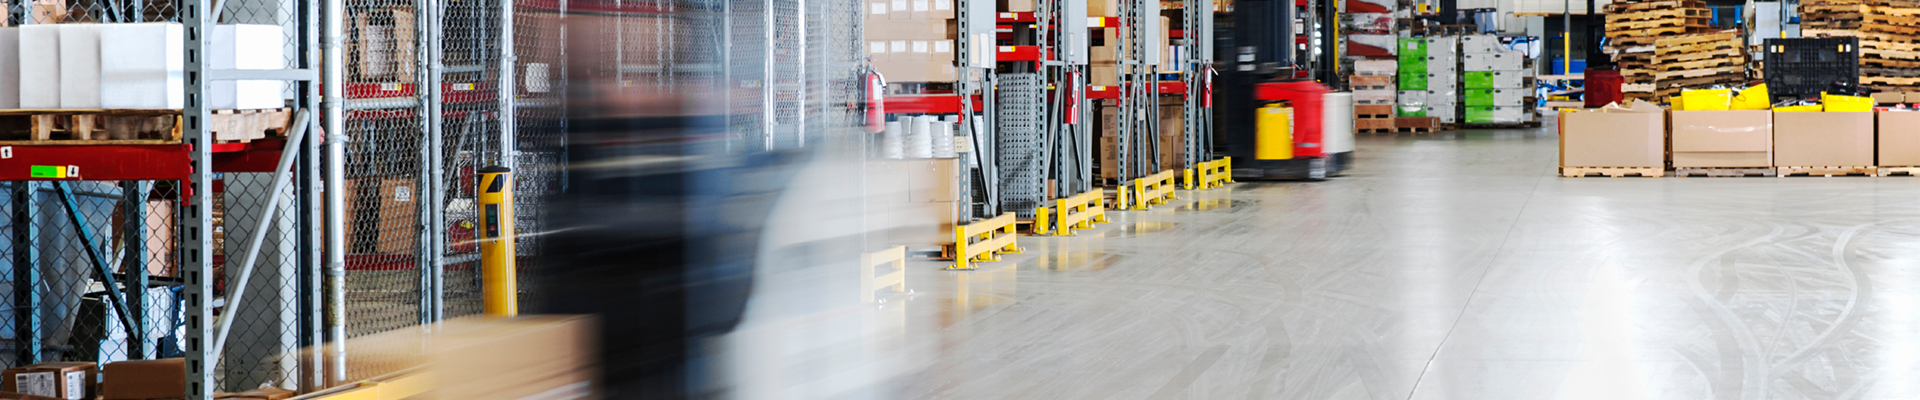 How To Prepare Your Warehouse For The Holidays